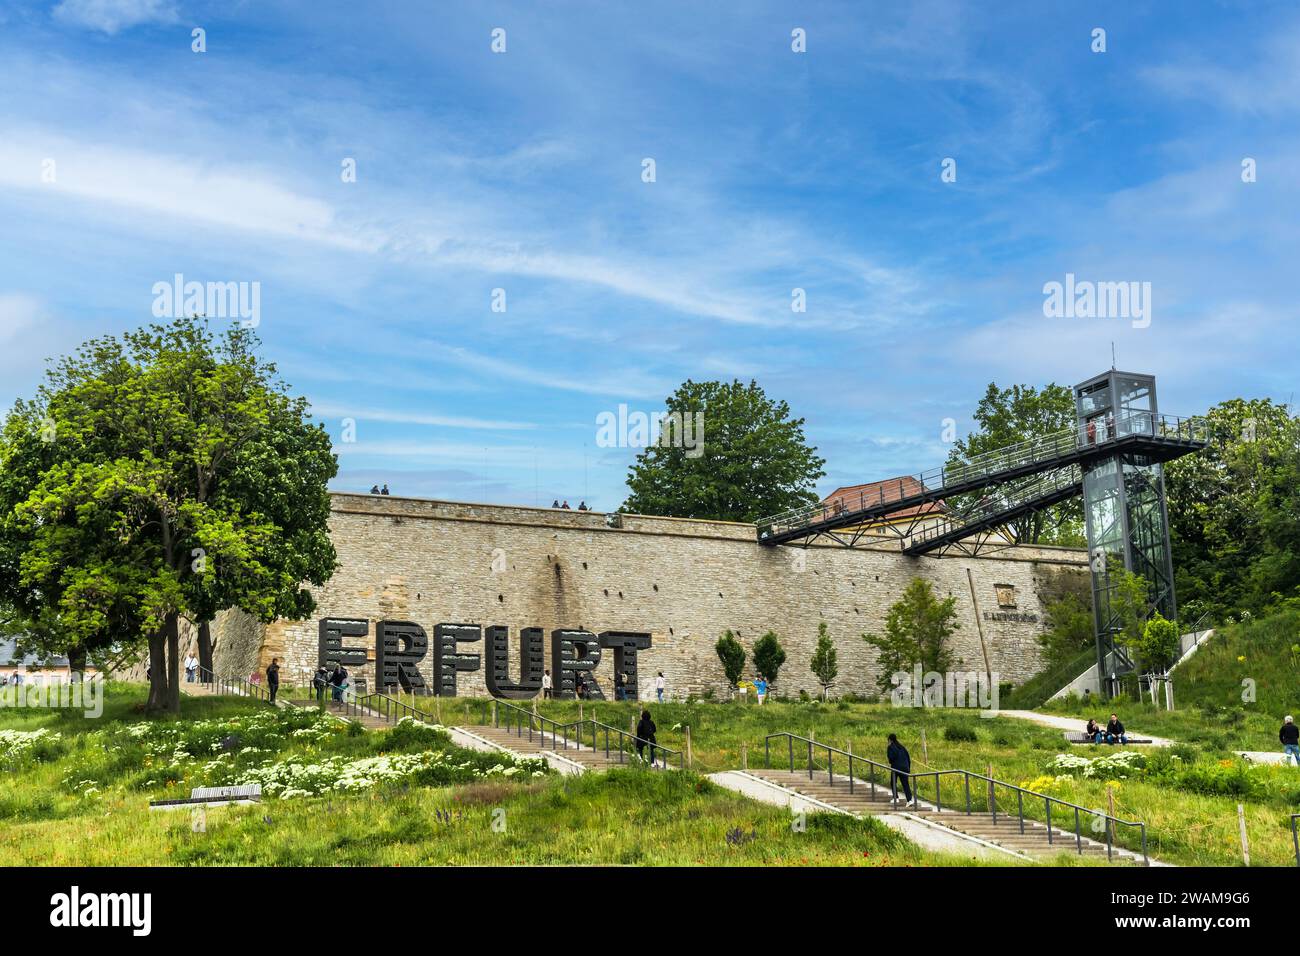 Erfurt, Germany - May 20, 2023: The lettering of the city of Erfurt in Germany in large capital letters that are filled with plants. Copy space. Stock Photo